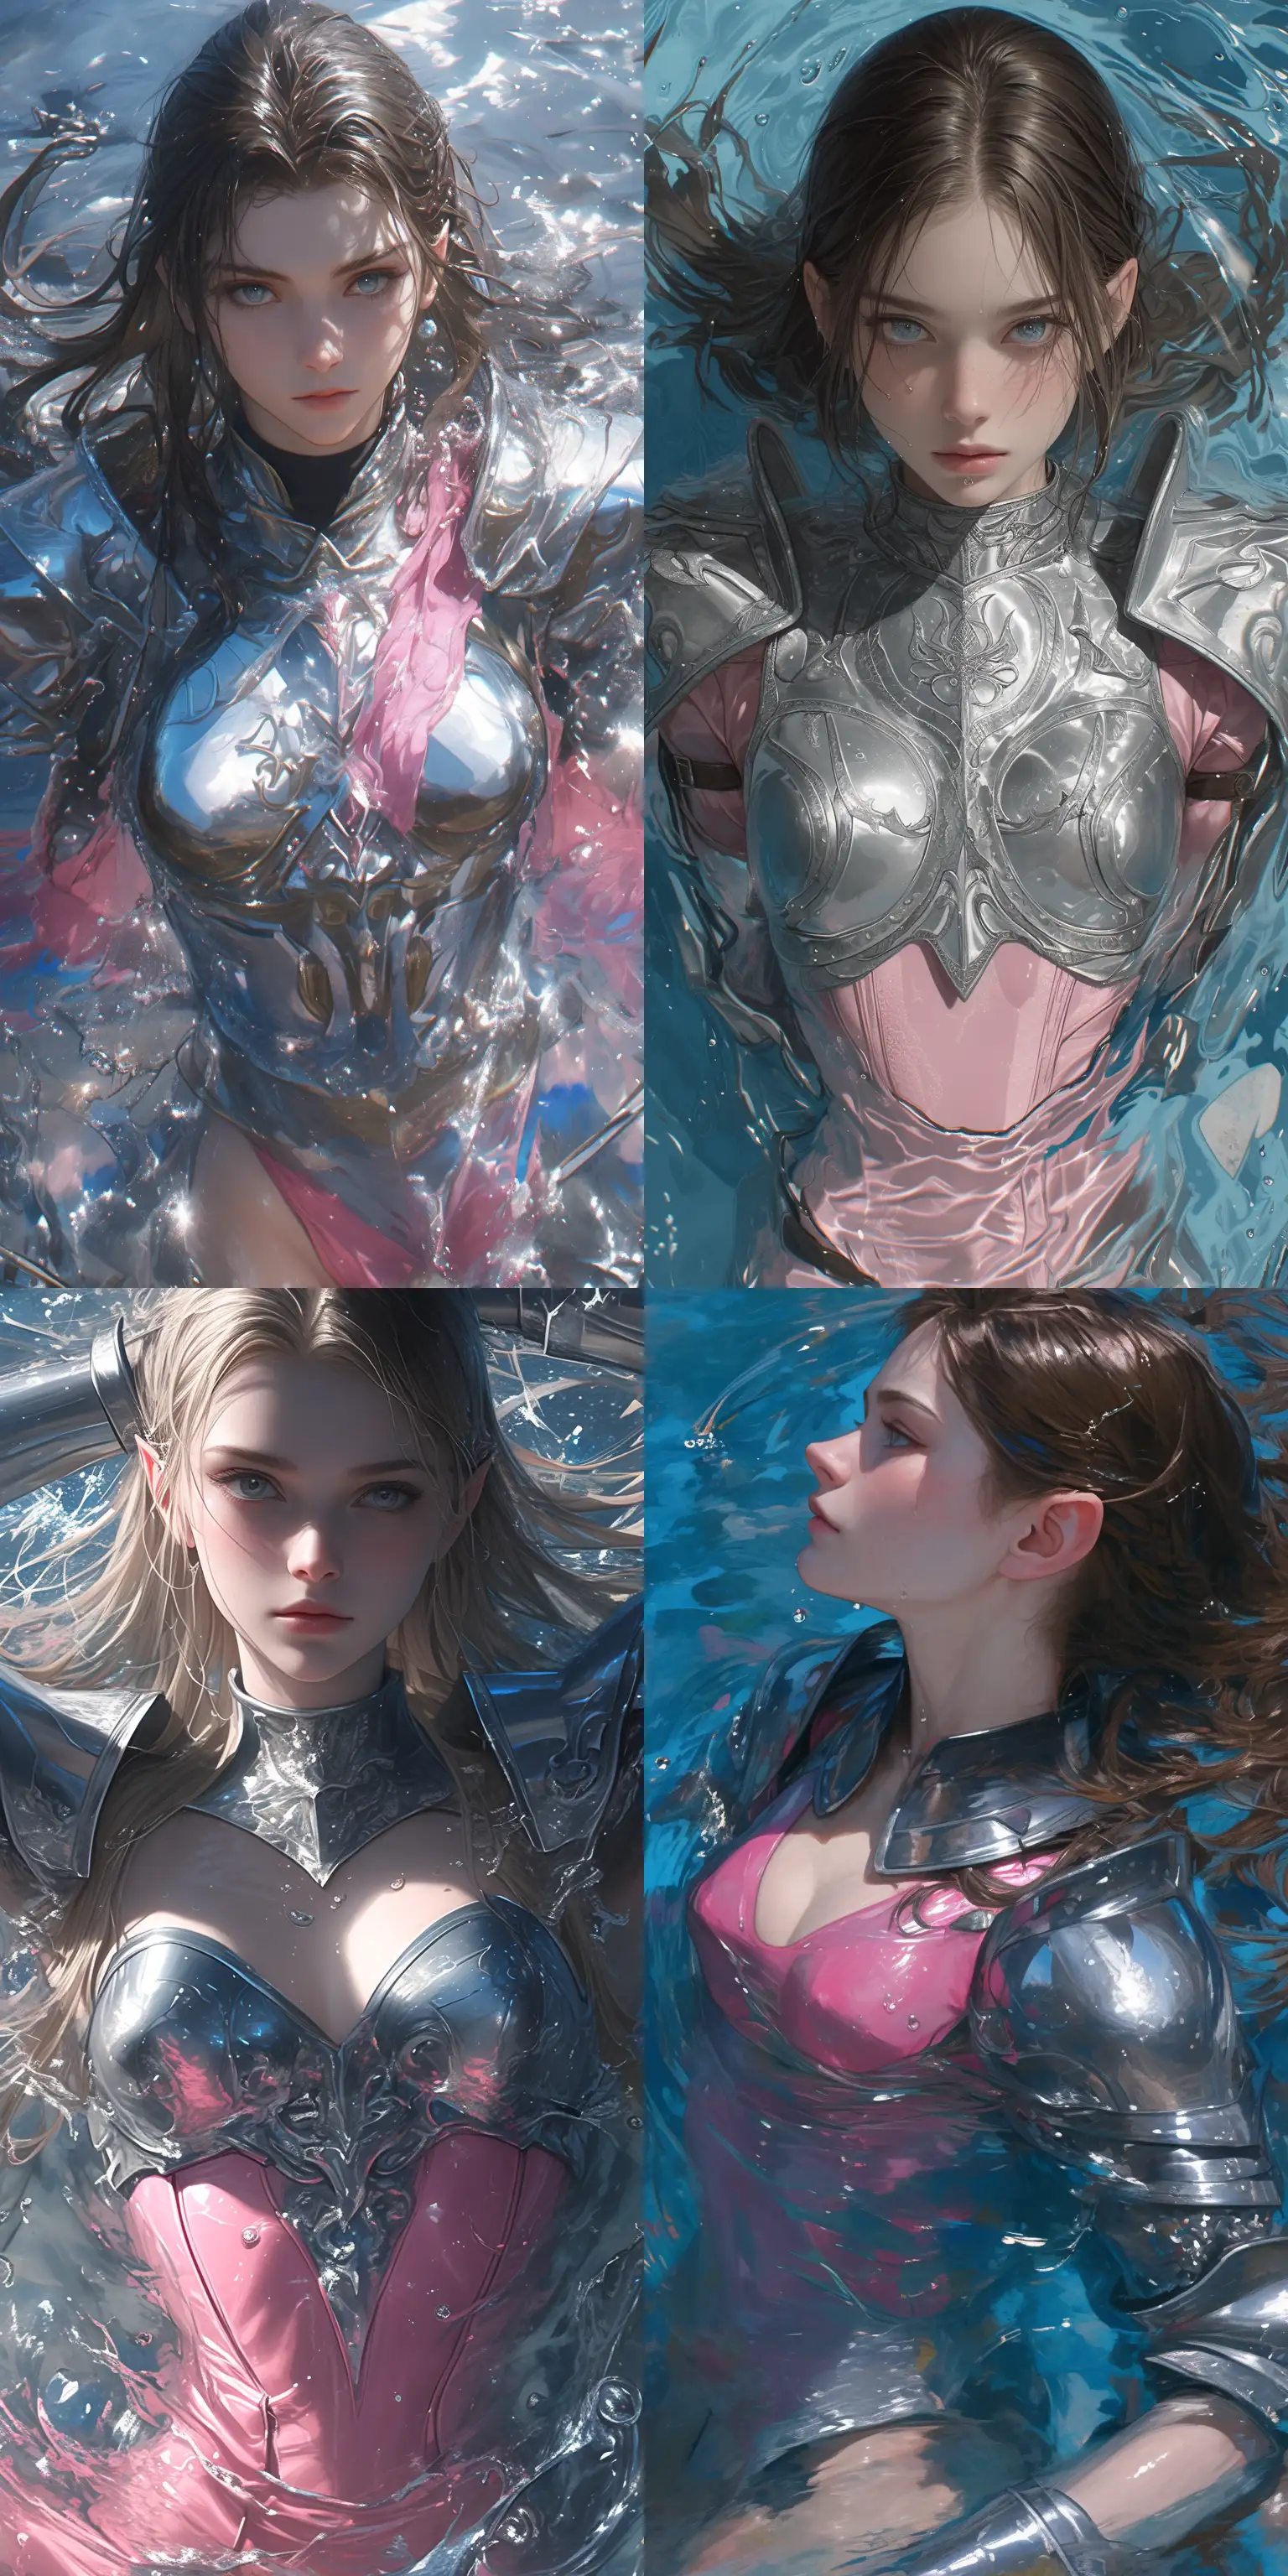 Arwen-Wading-in-Silver-and-Pink-Armor